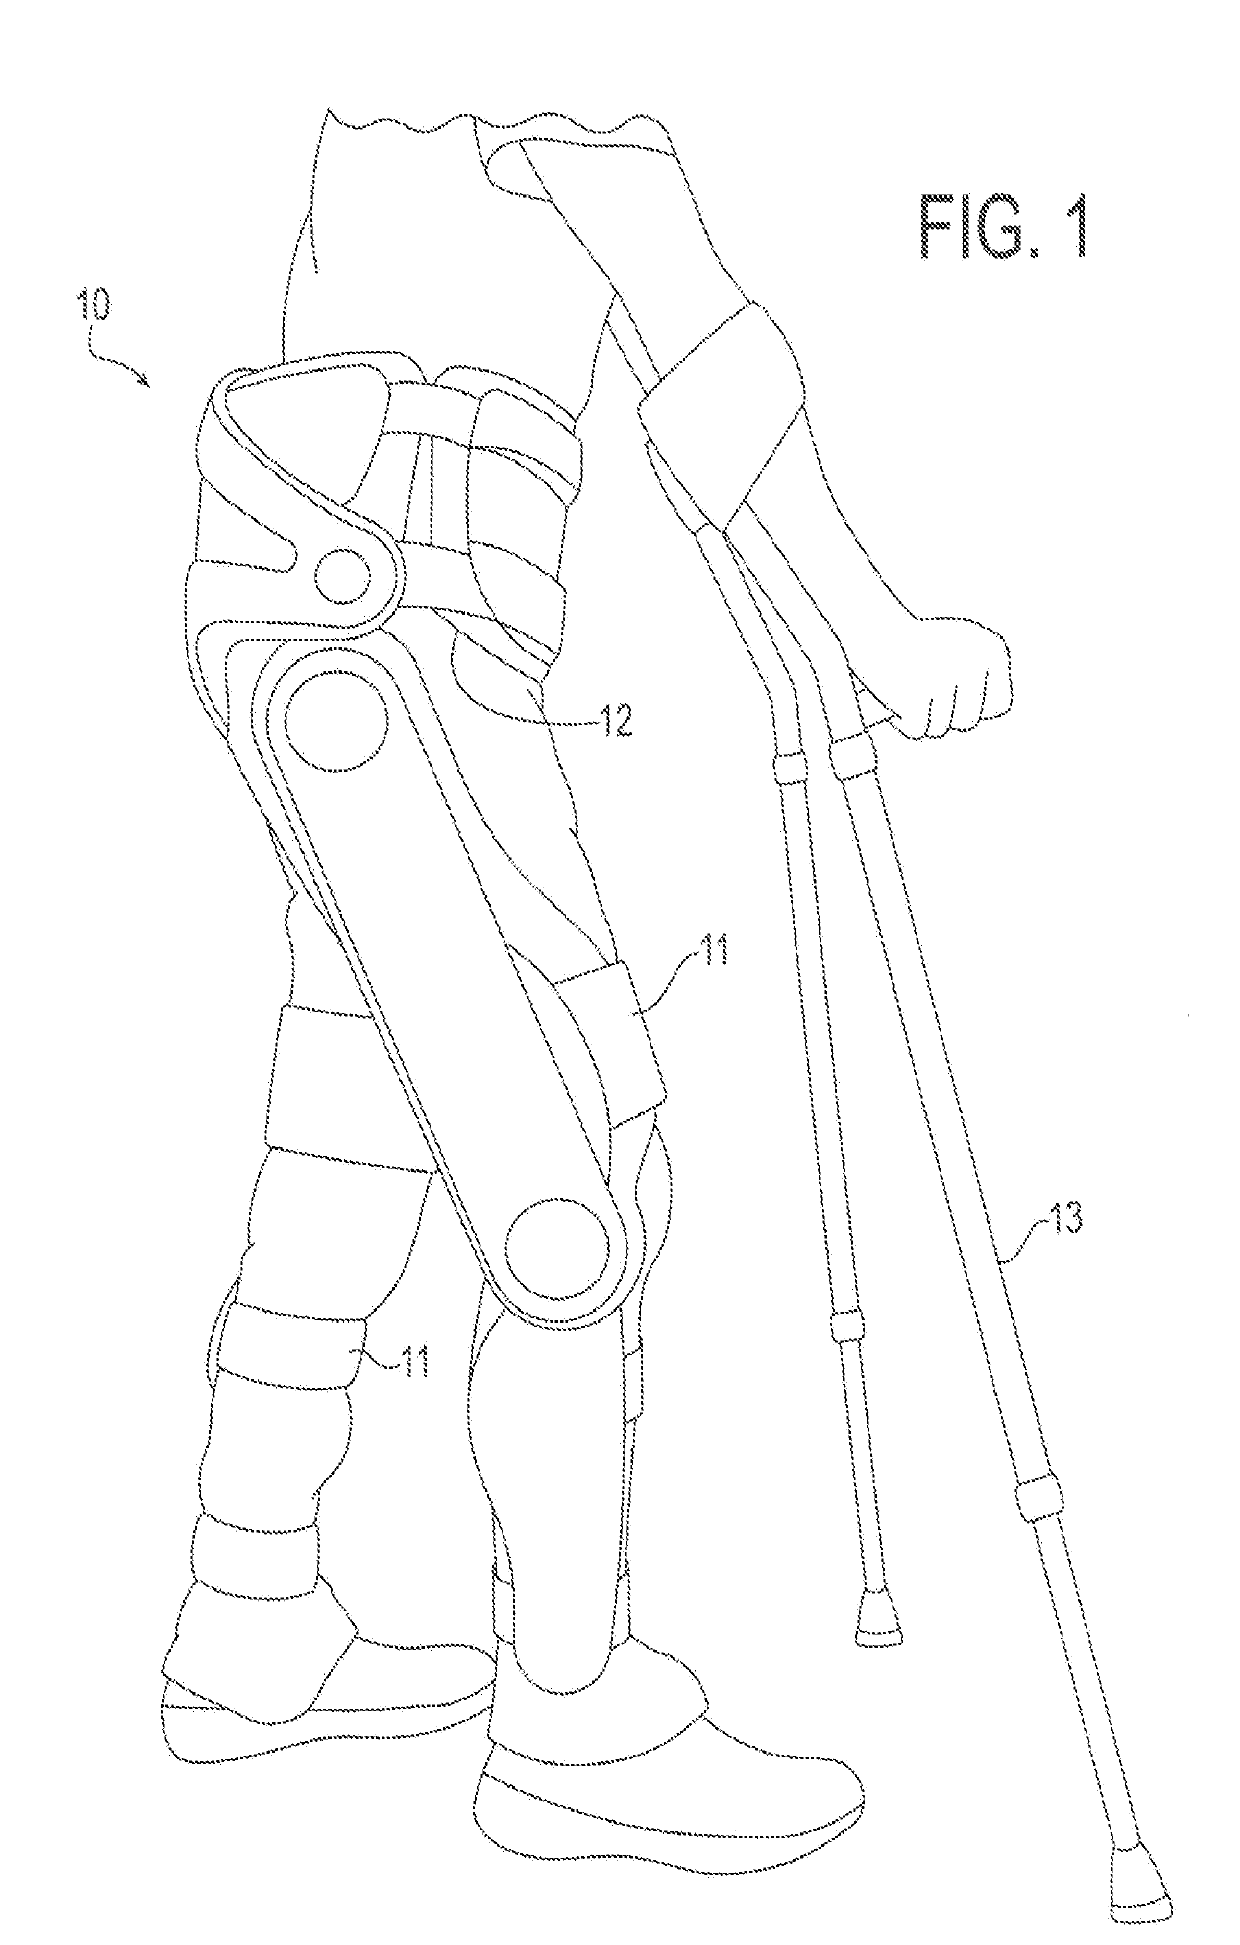 Safety monitoring and control system and methods for a legged mobility exoskeleton device